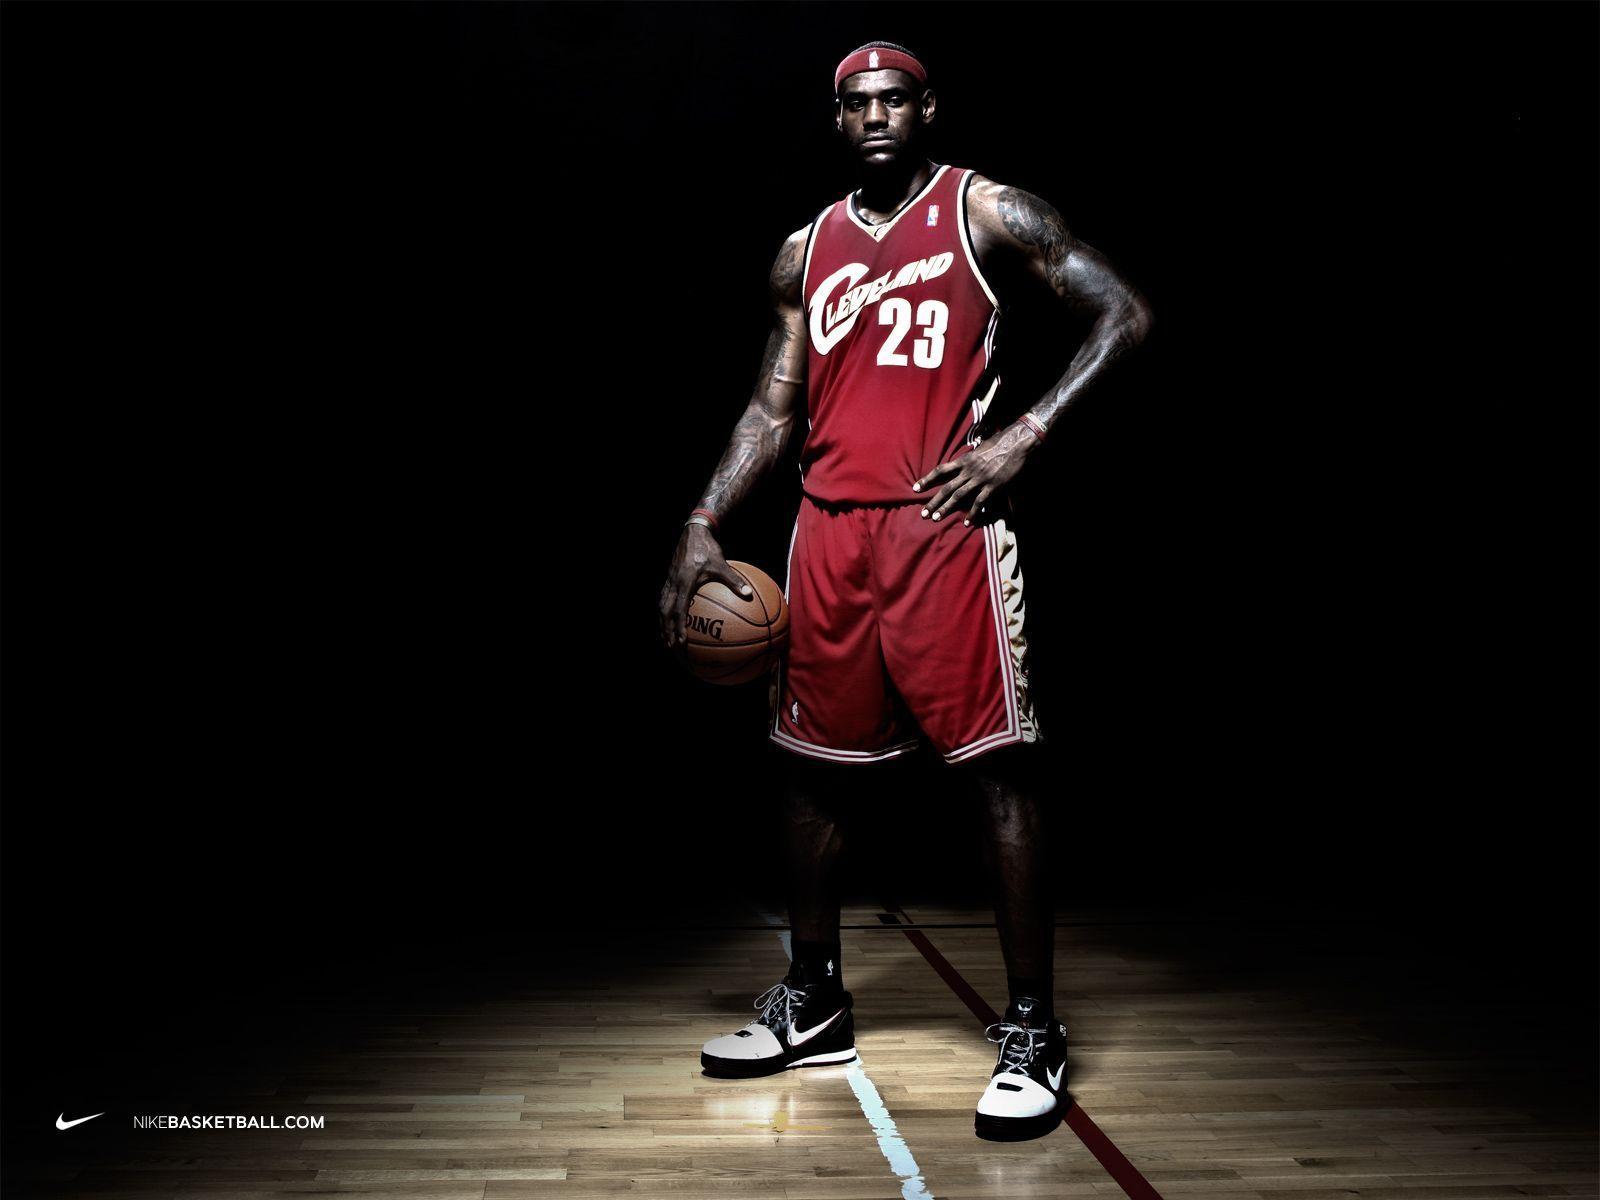 Captivating Lebron James Nike Shoes in Usa 1600x1200PX Marvelous